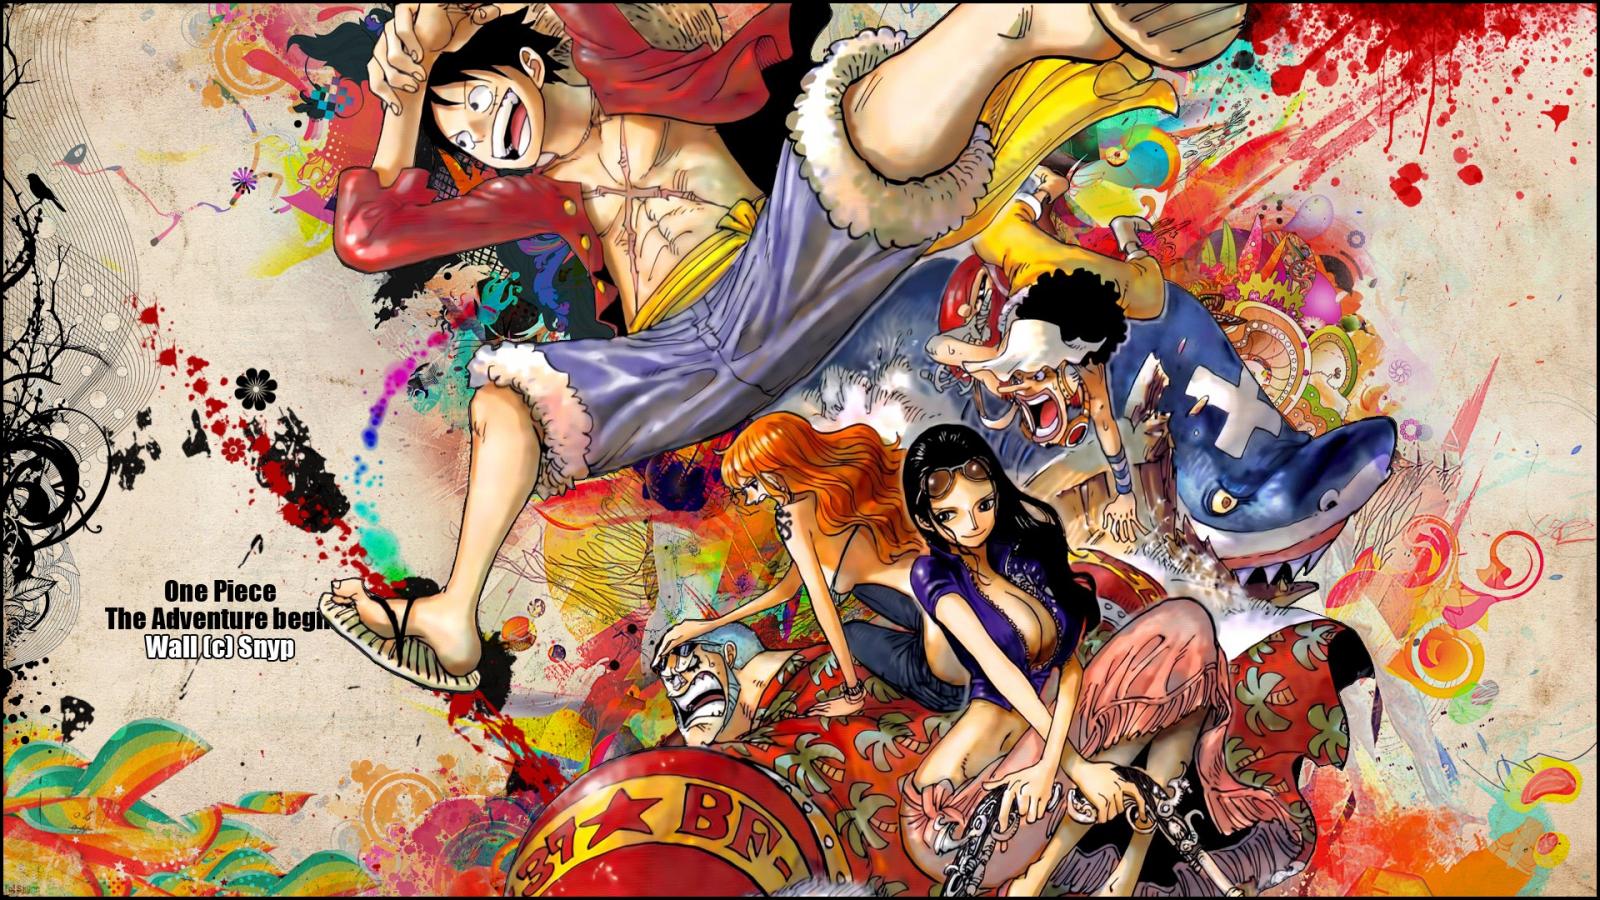 One Piece 壁紙８ Picture Room